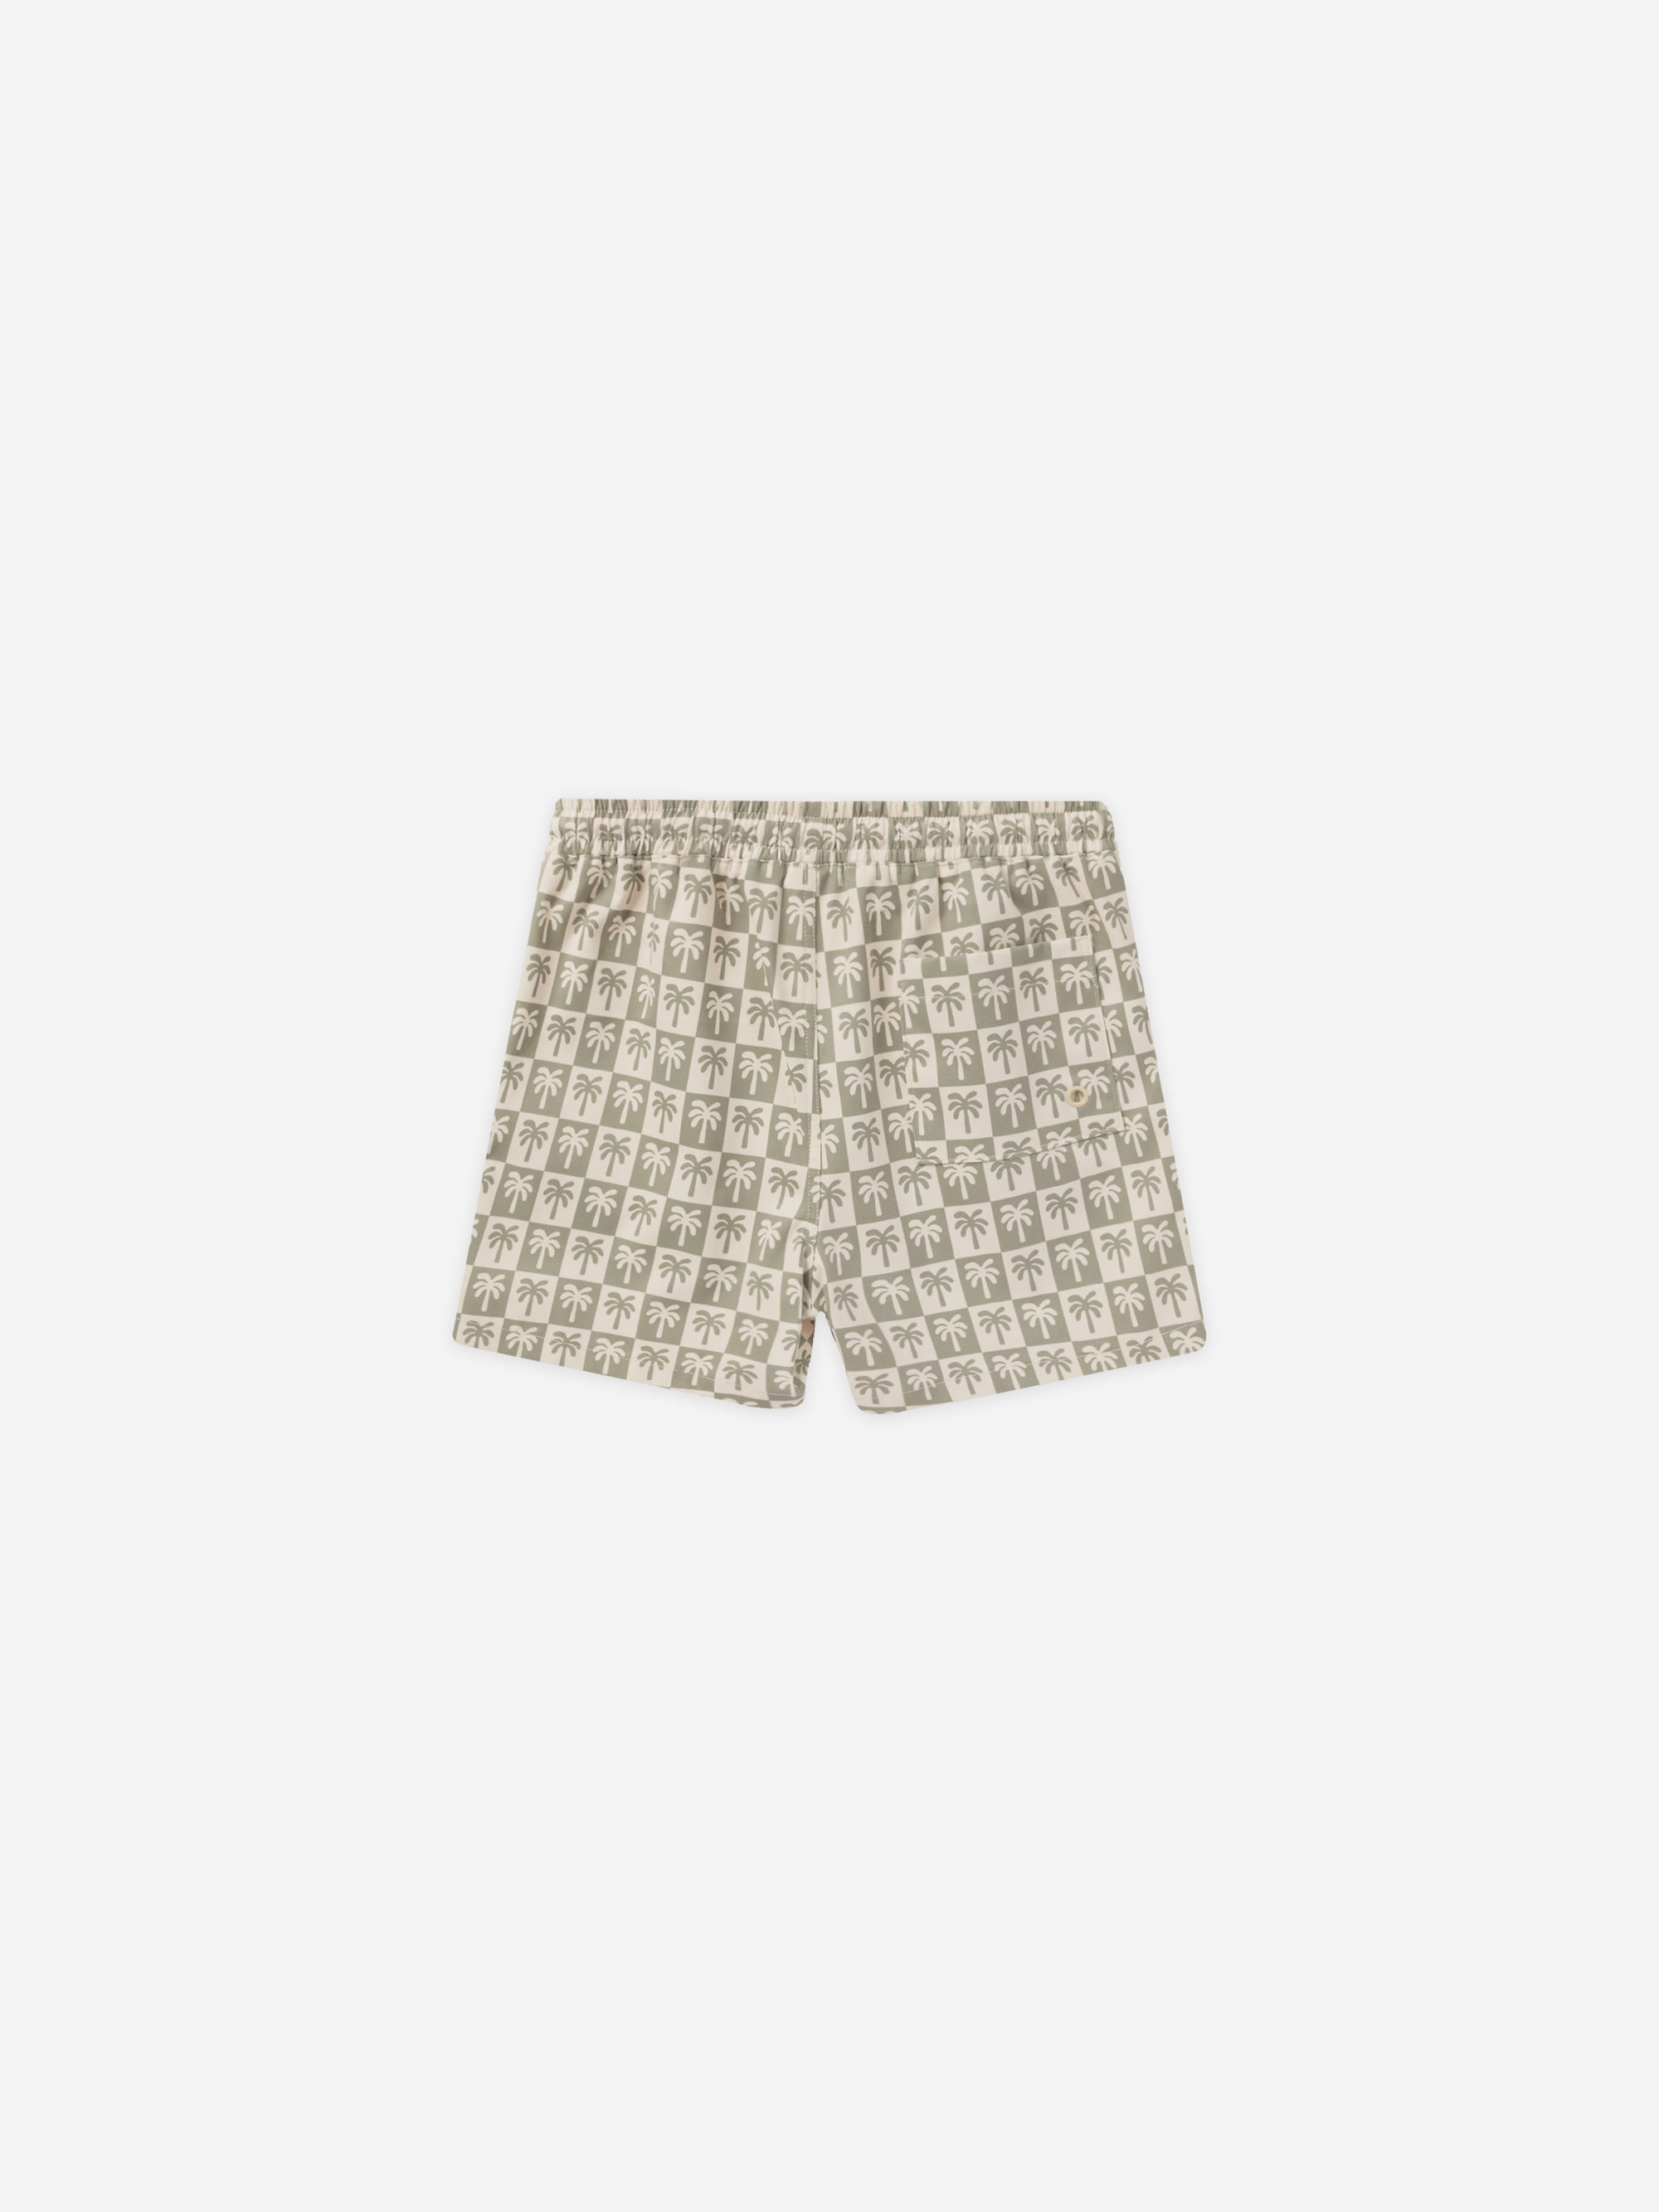 Boardshort || Palm Check - Rylee + Cru | Kids Clothes | Trendy Baby Clothes | Modern Infant Outfits |